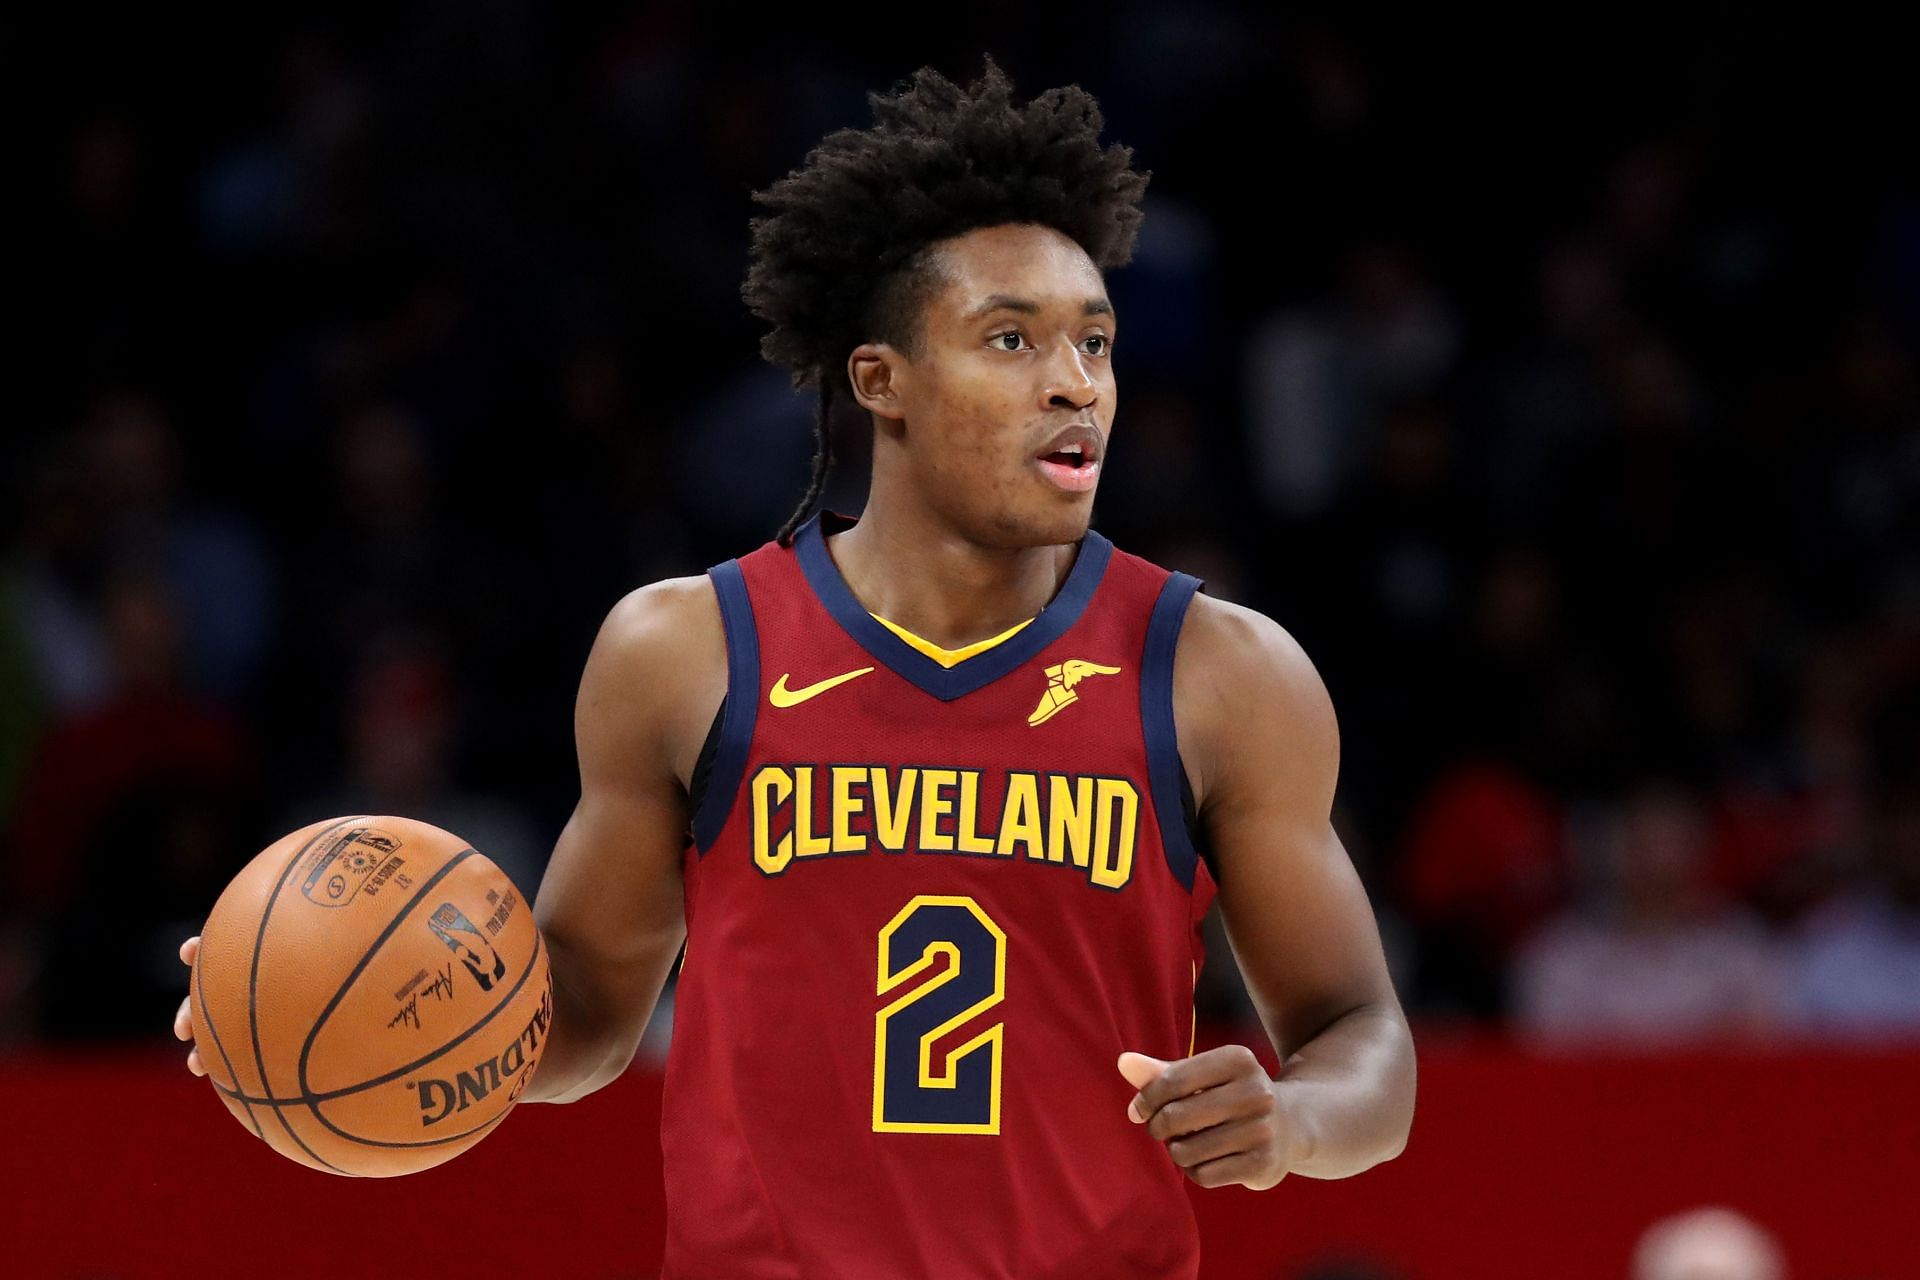 Collin Sexton of the Cleveland Cavaliers.